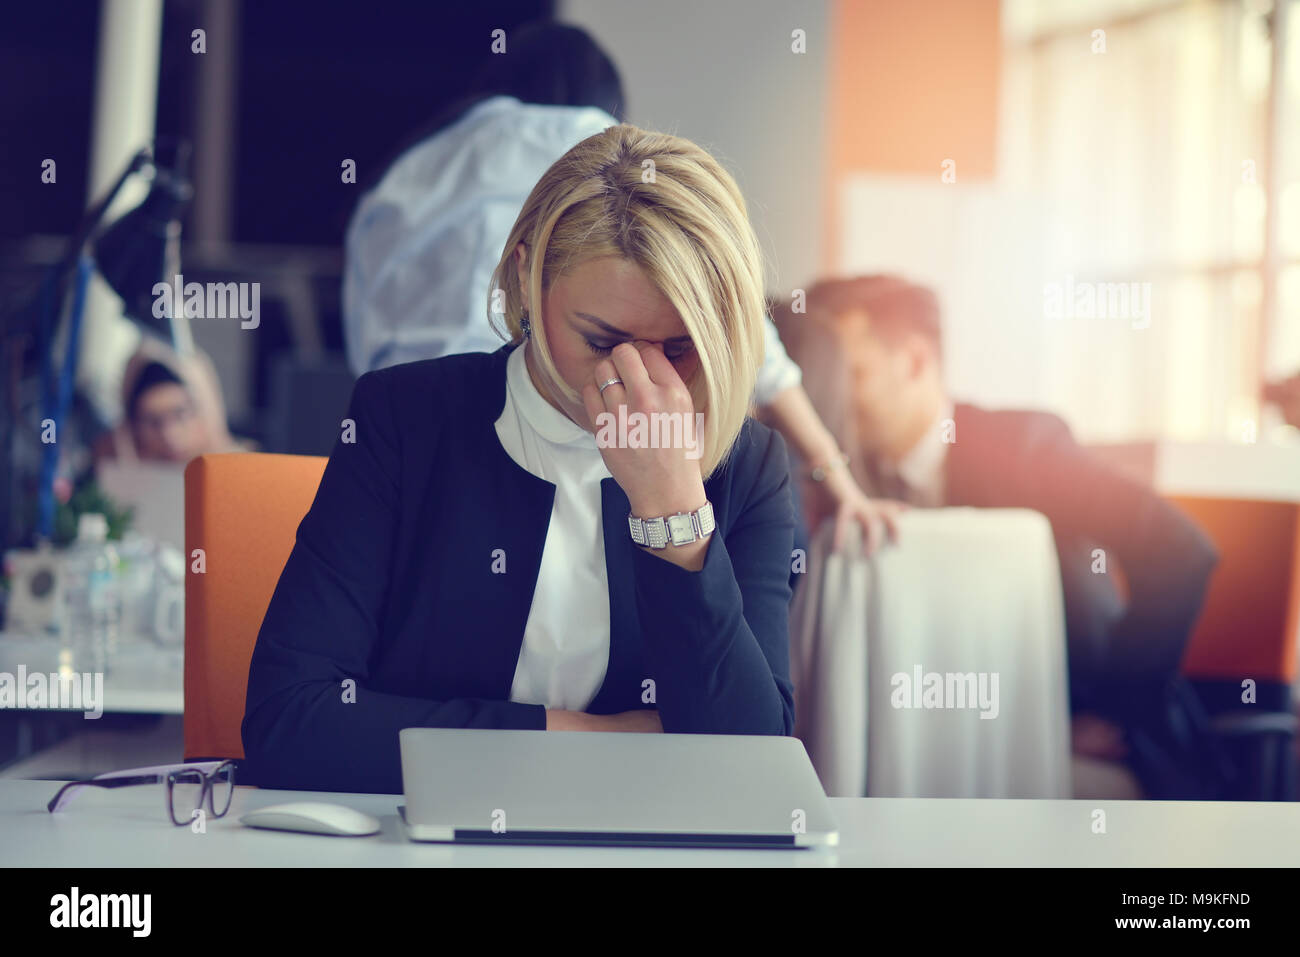 Feeling tired and stressed. Frustrated adult woman keeping eyes closed from fatigue while sitting in office. Stock Photo